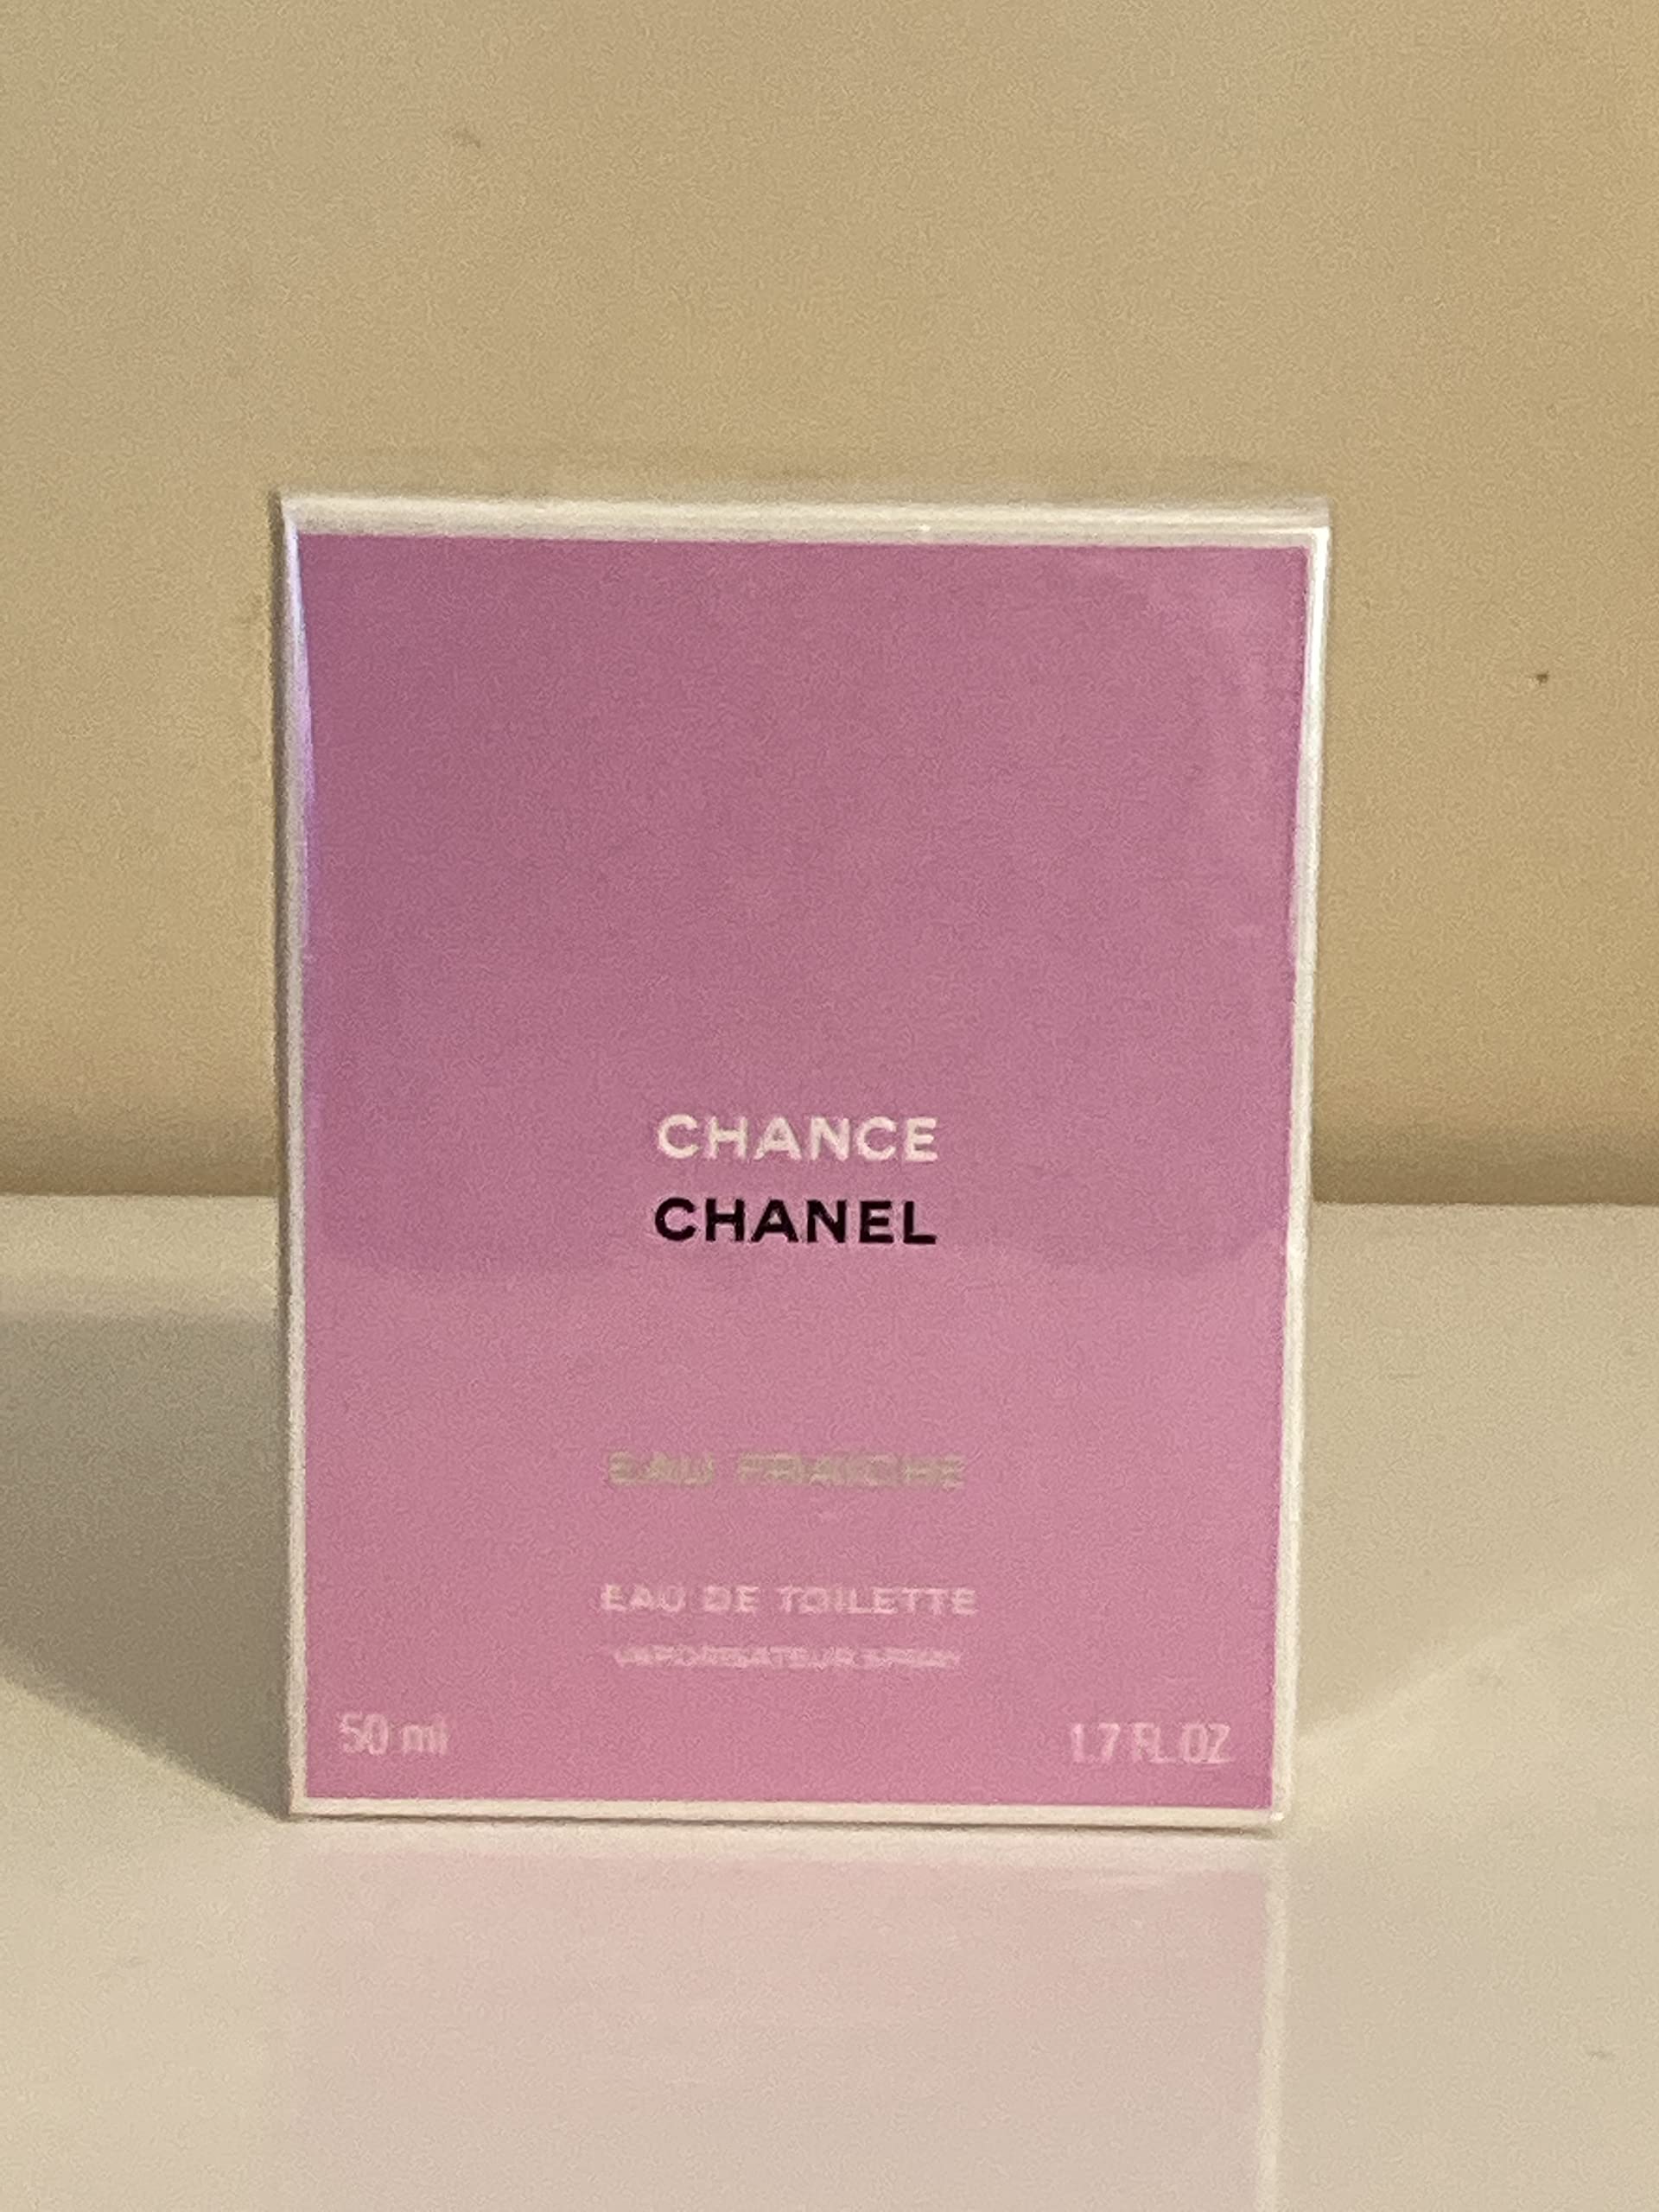 chanel chance twist and spray refill